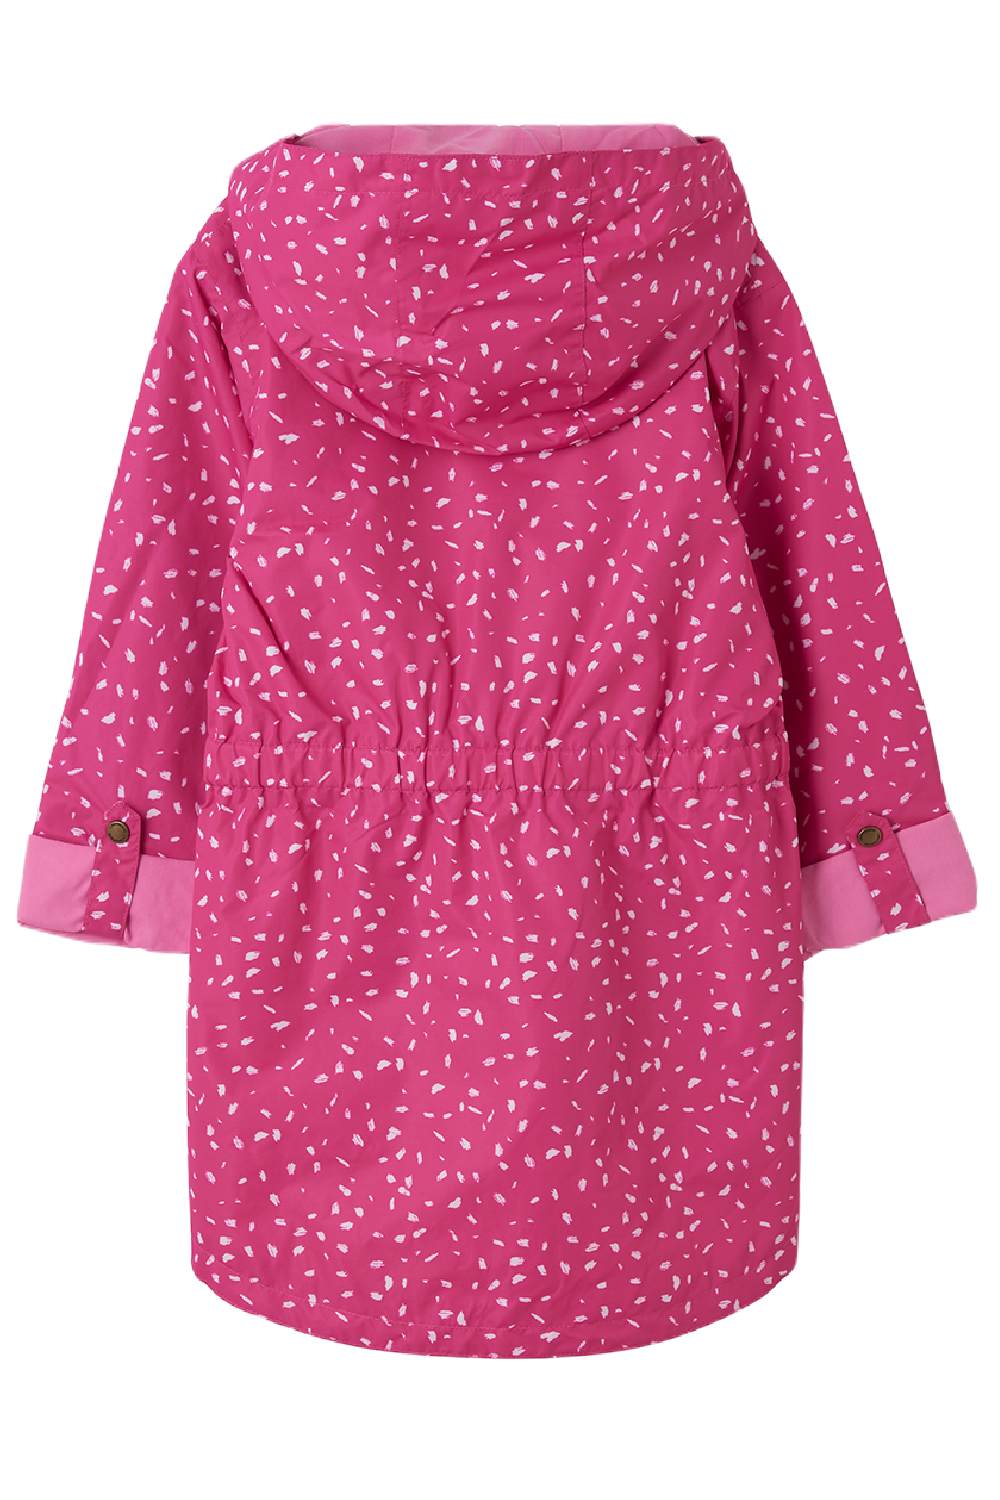 Lighthouse Charlotte Waterproof Parka Jacket in Bright Pink Print 